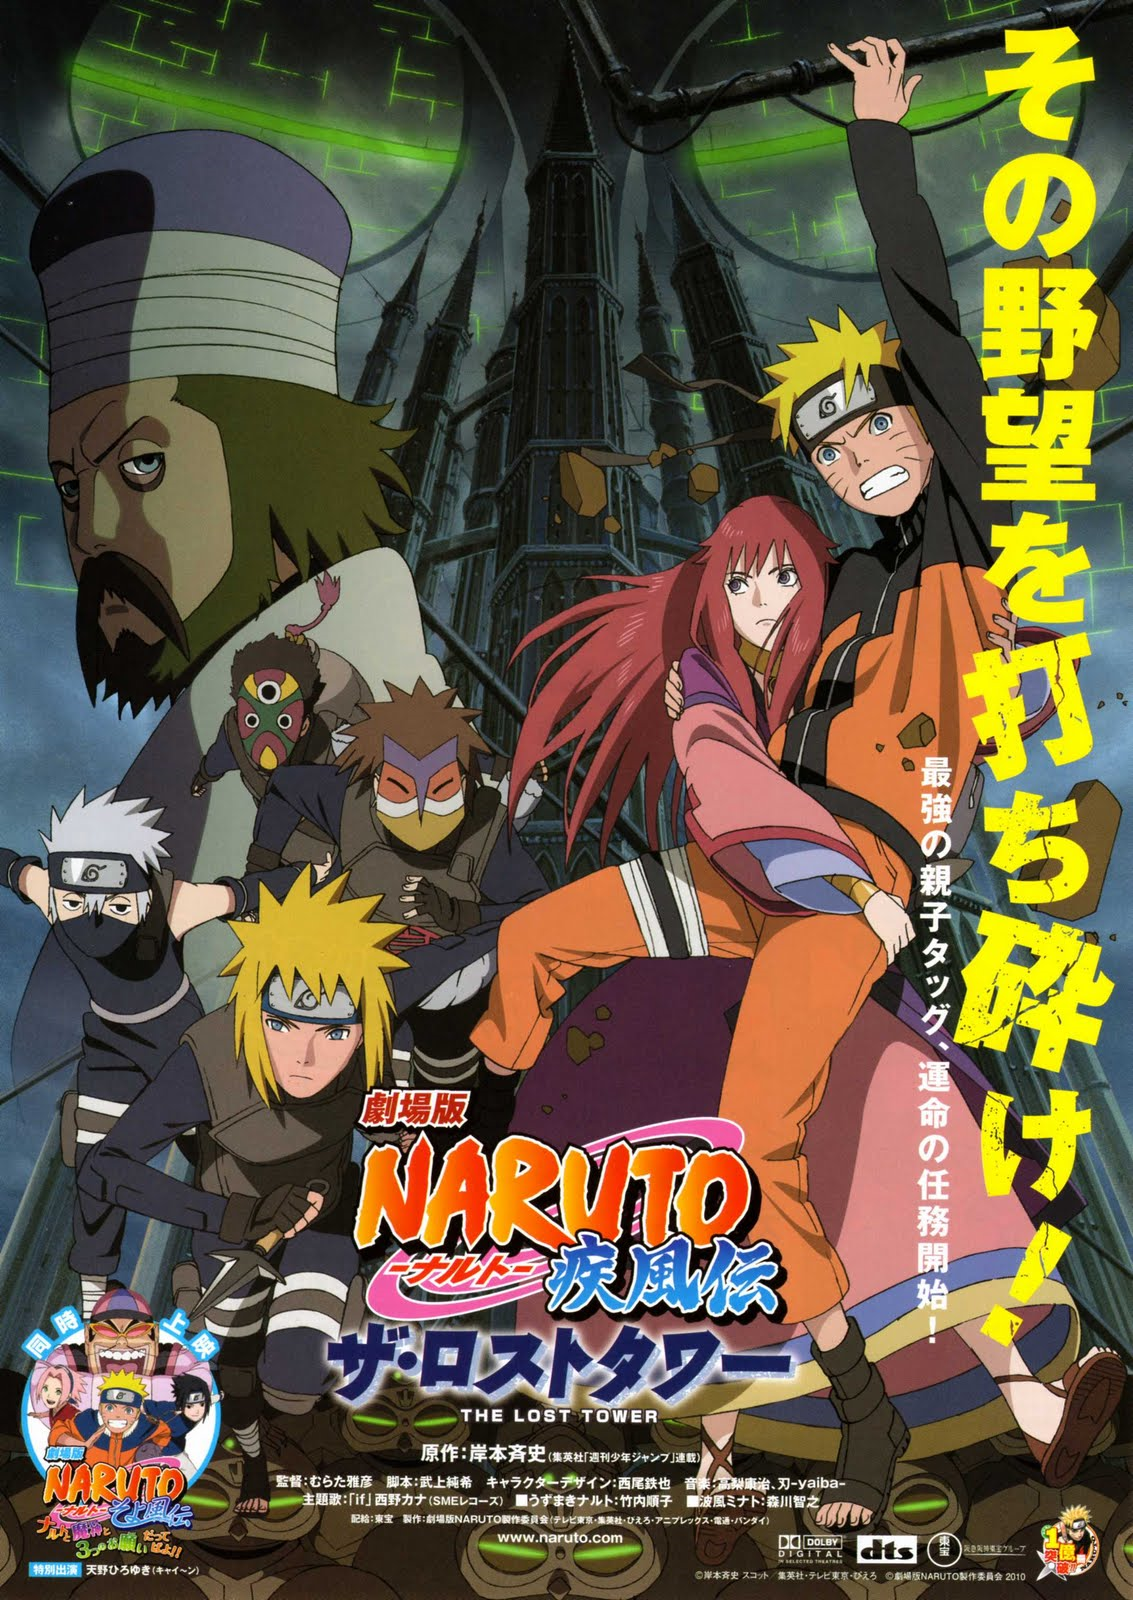 naruto shippuden movie 4 the lost tower release date